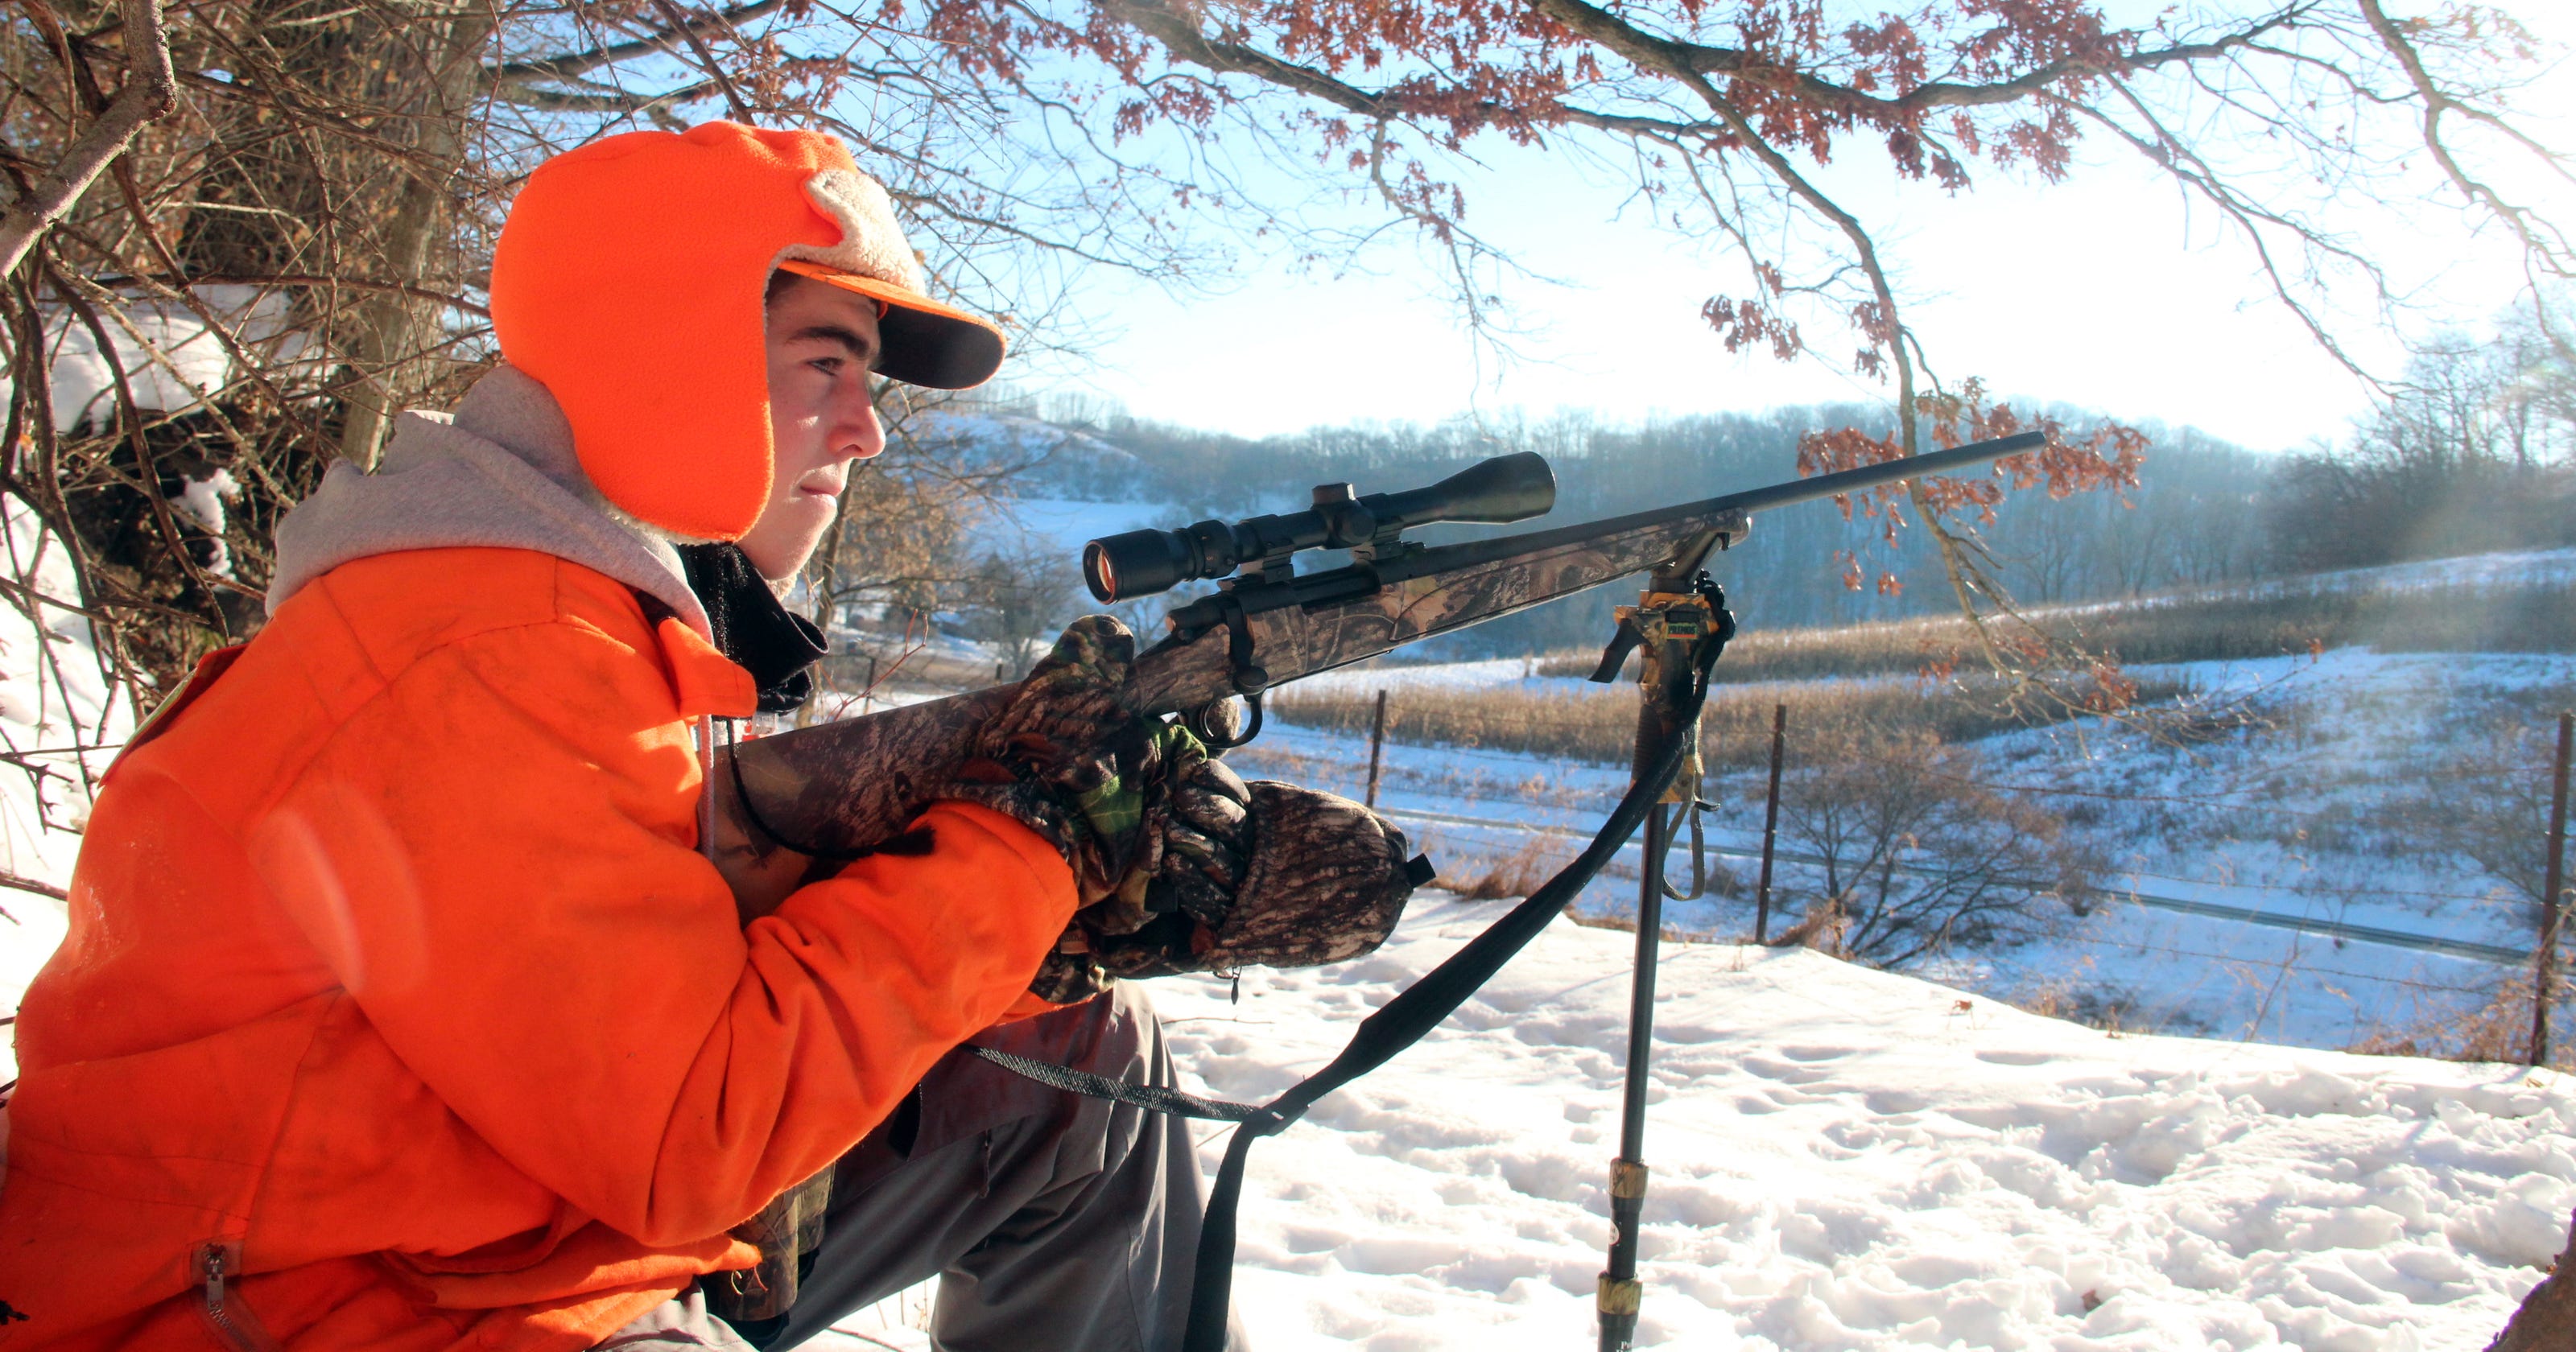 Children of any age allowed to hunt in Wisconsin